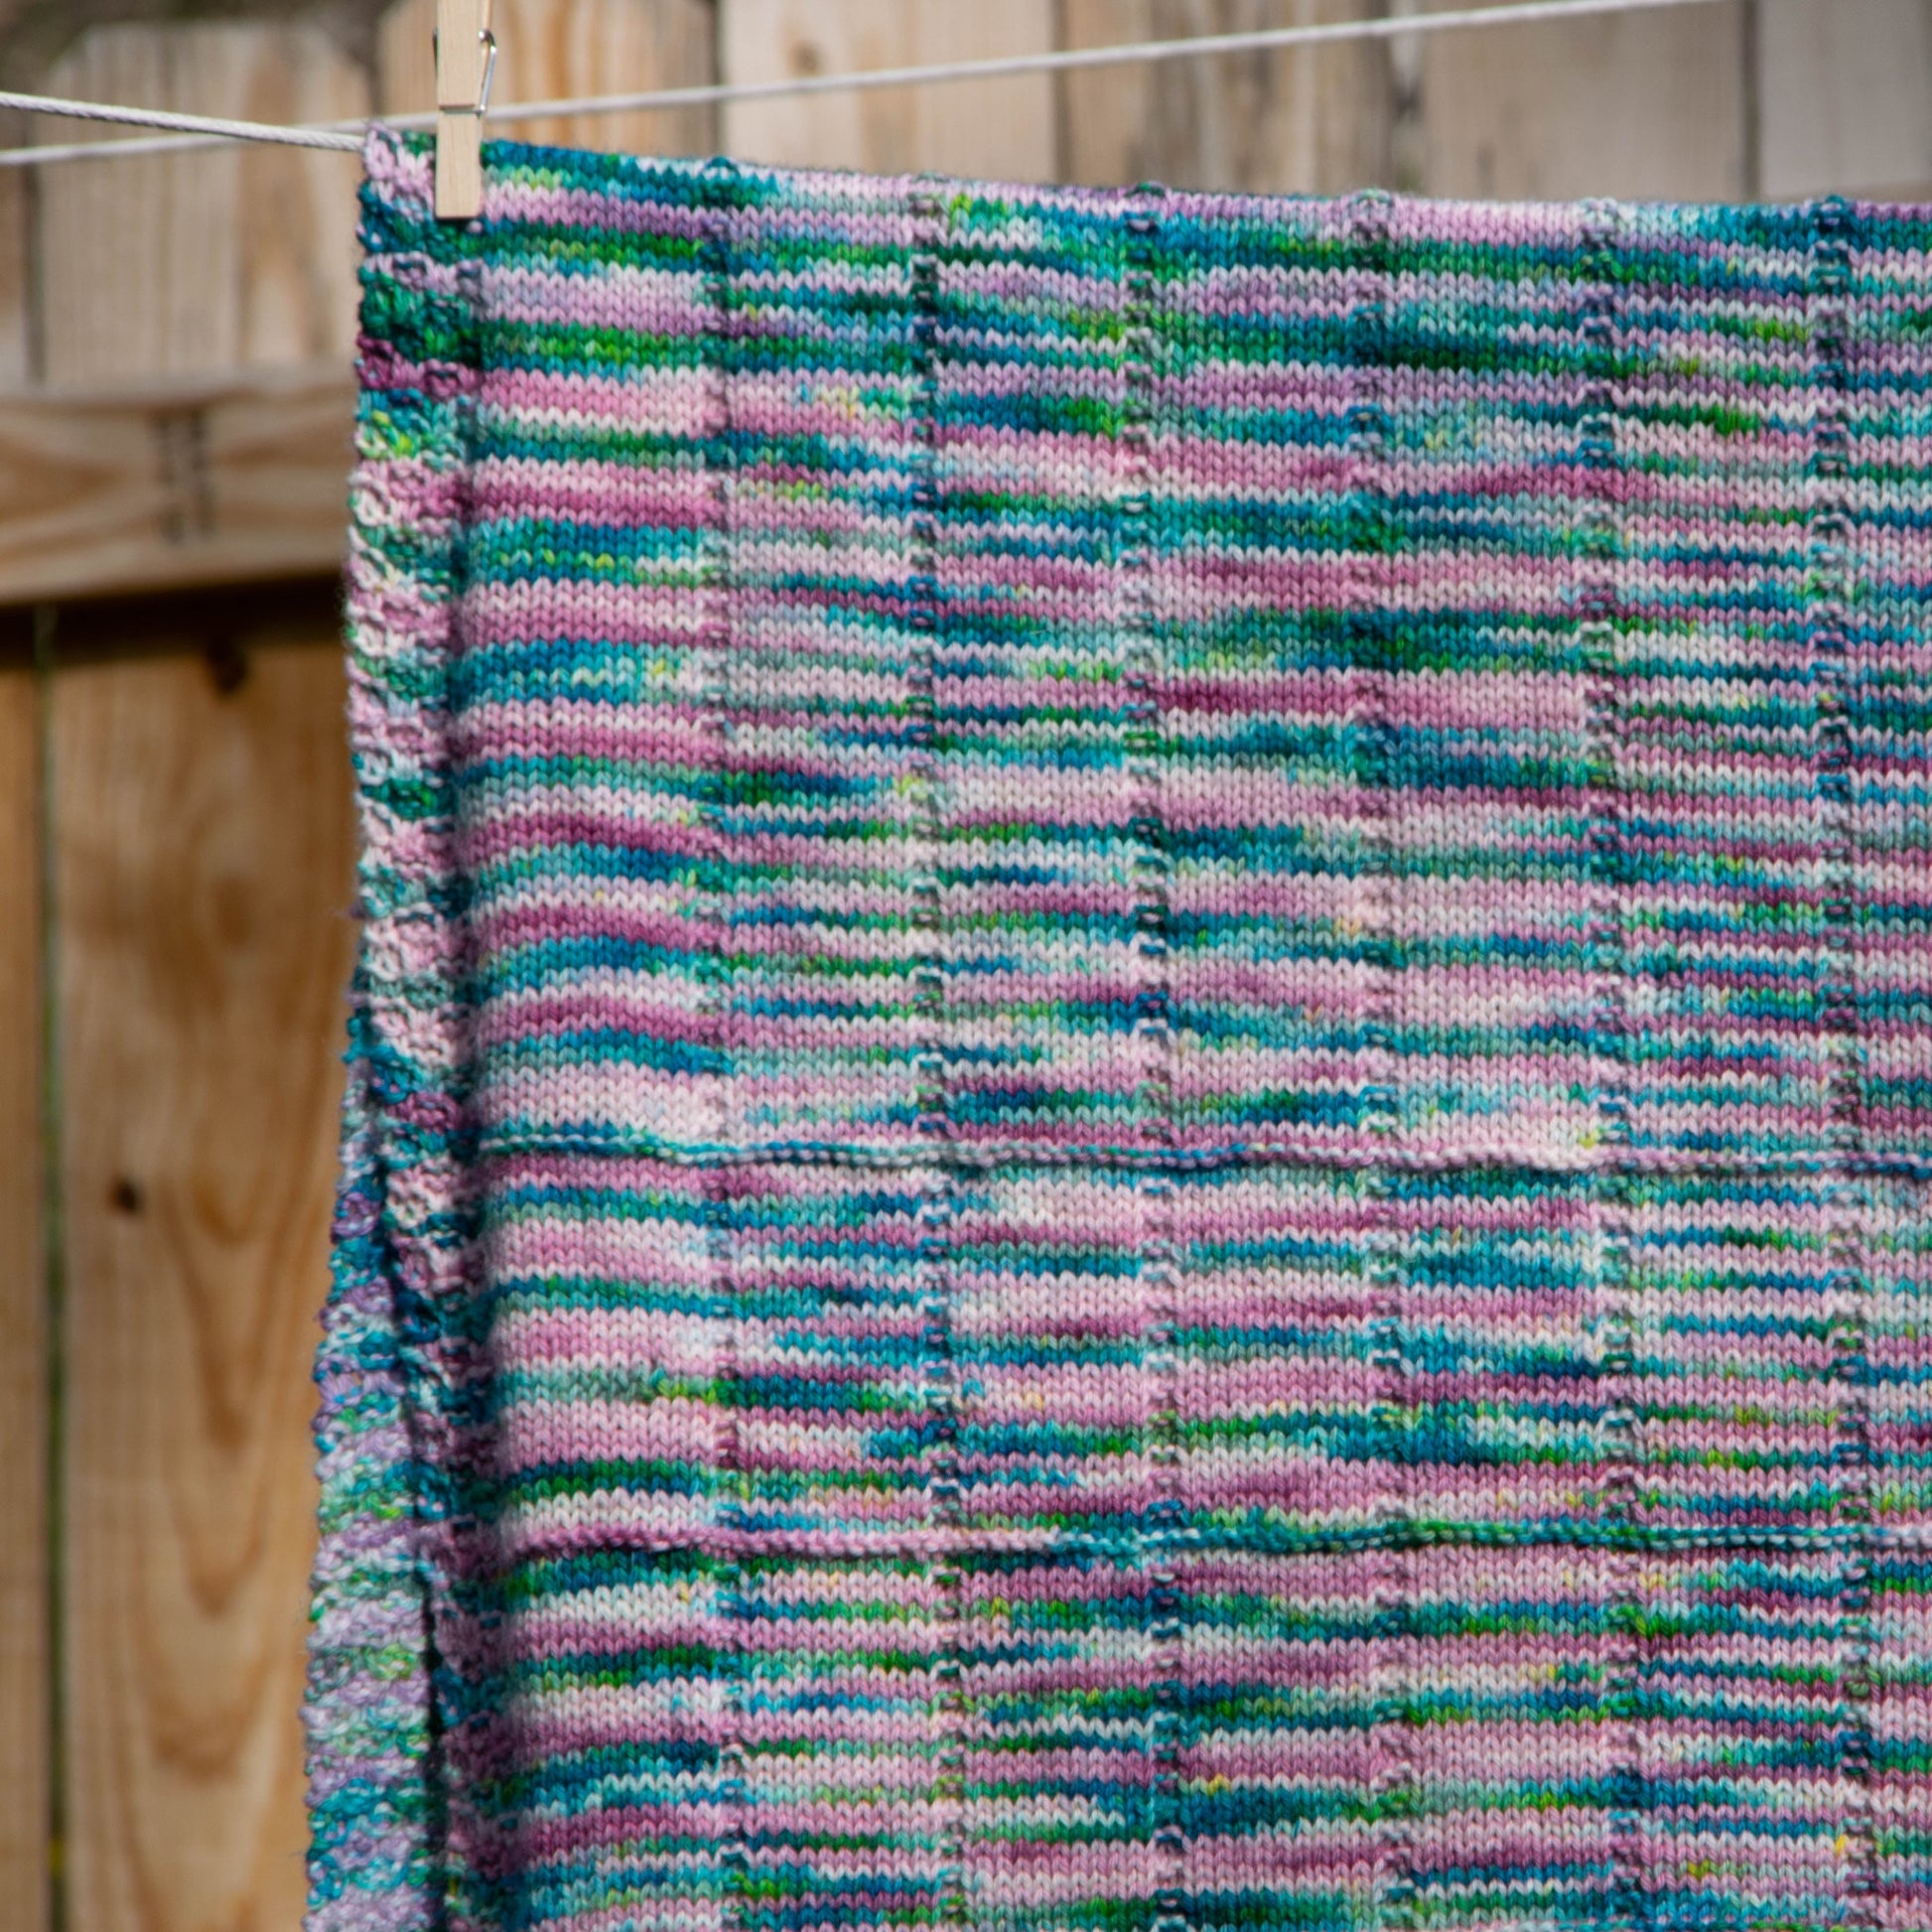 A closeup of the texture of the blanket, consisting of stockinette squares and rectangles and a seed stitch border.